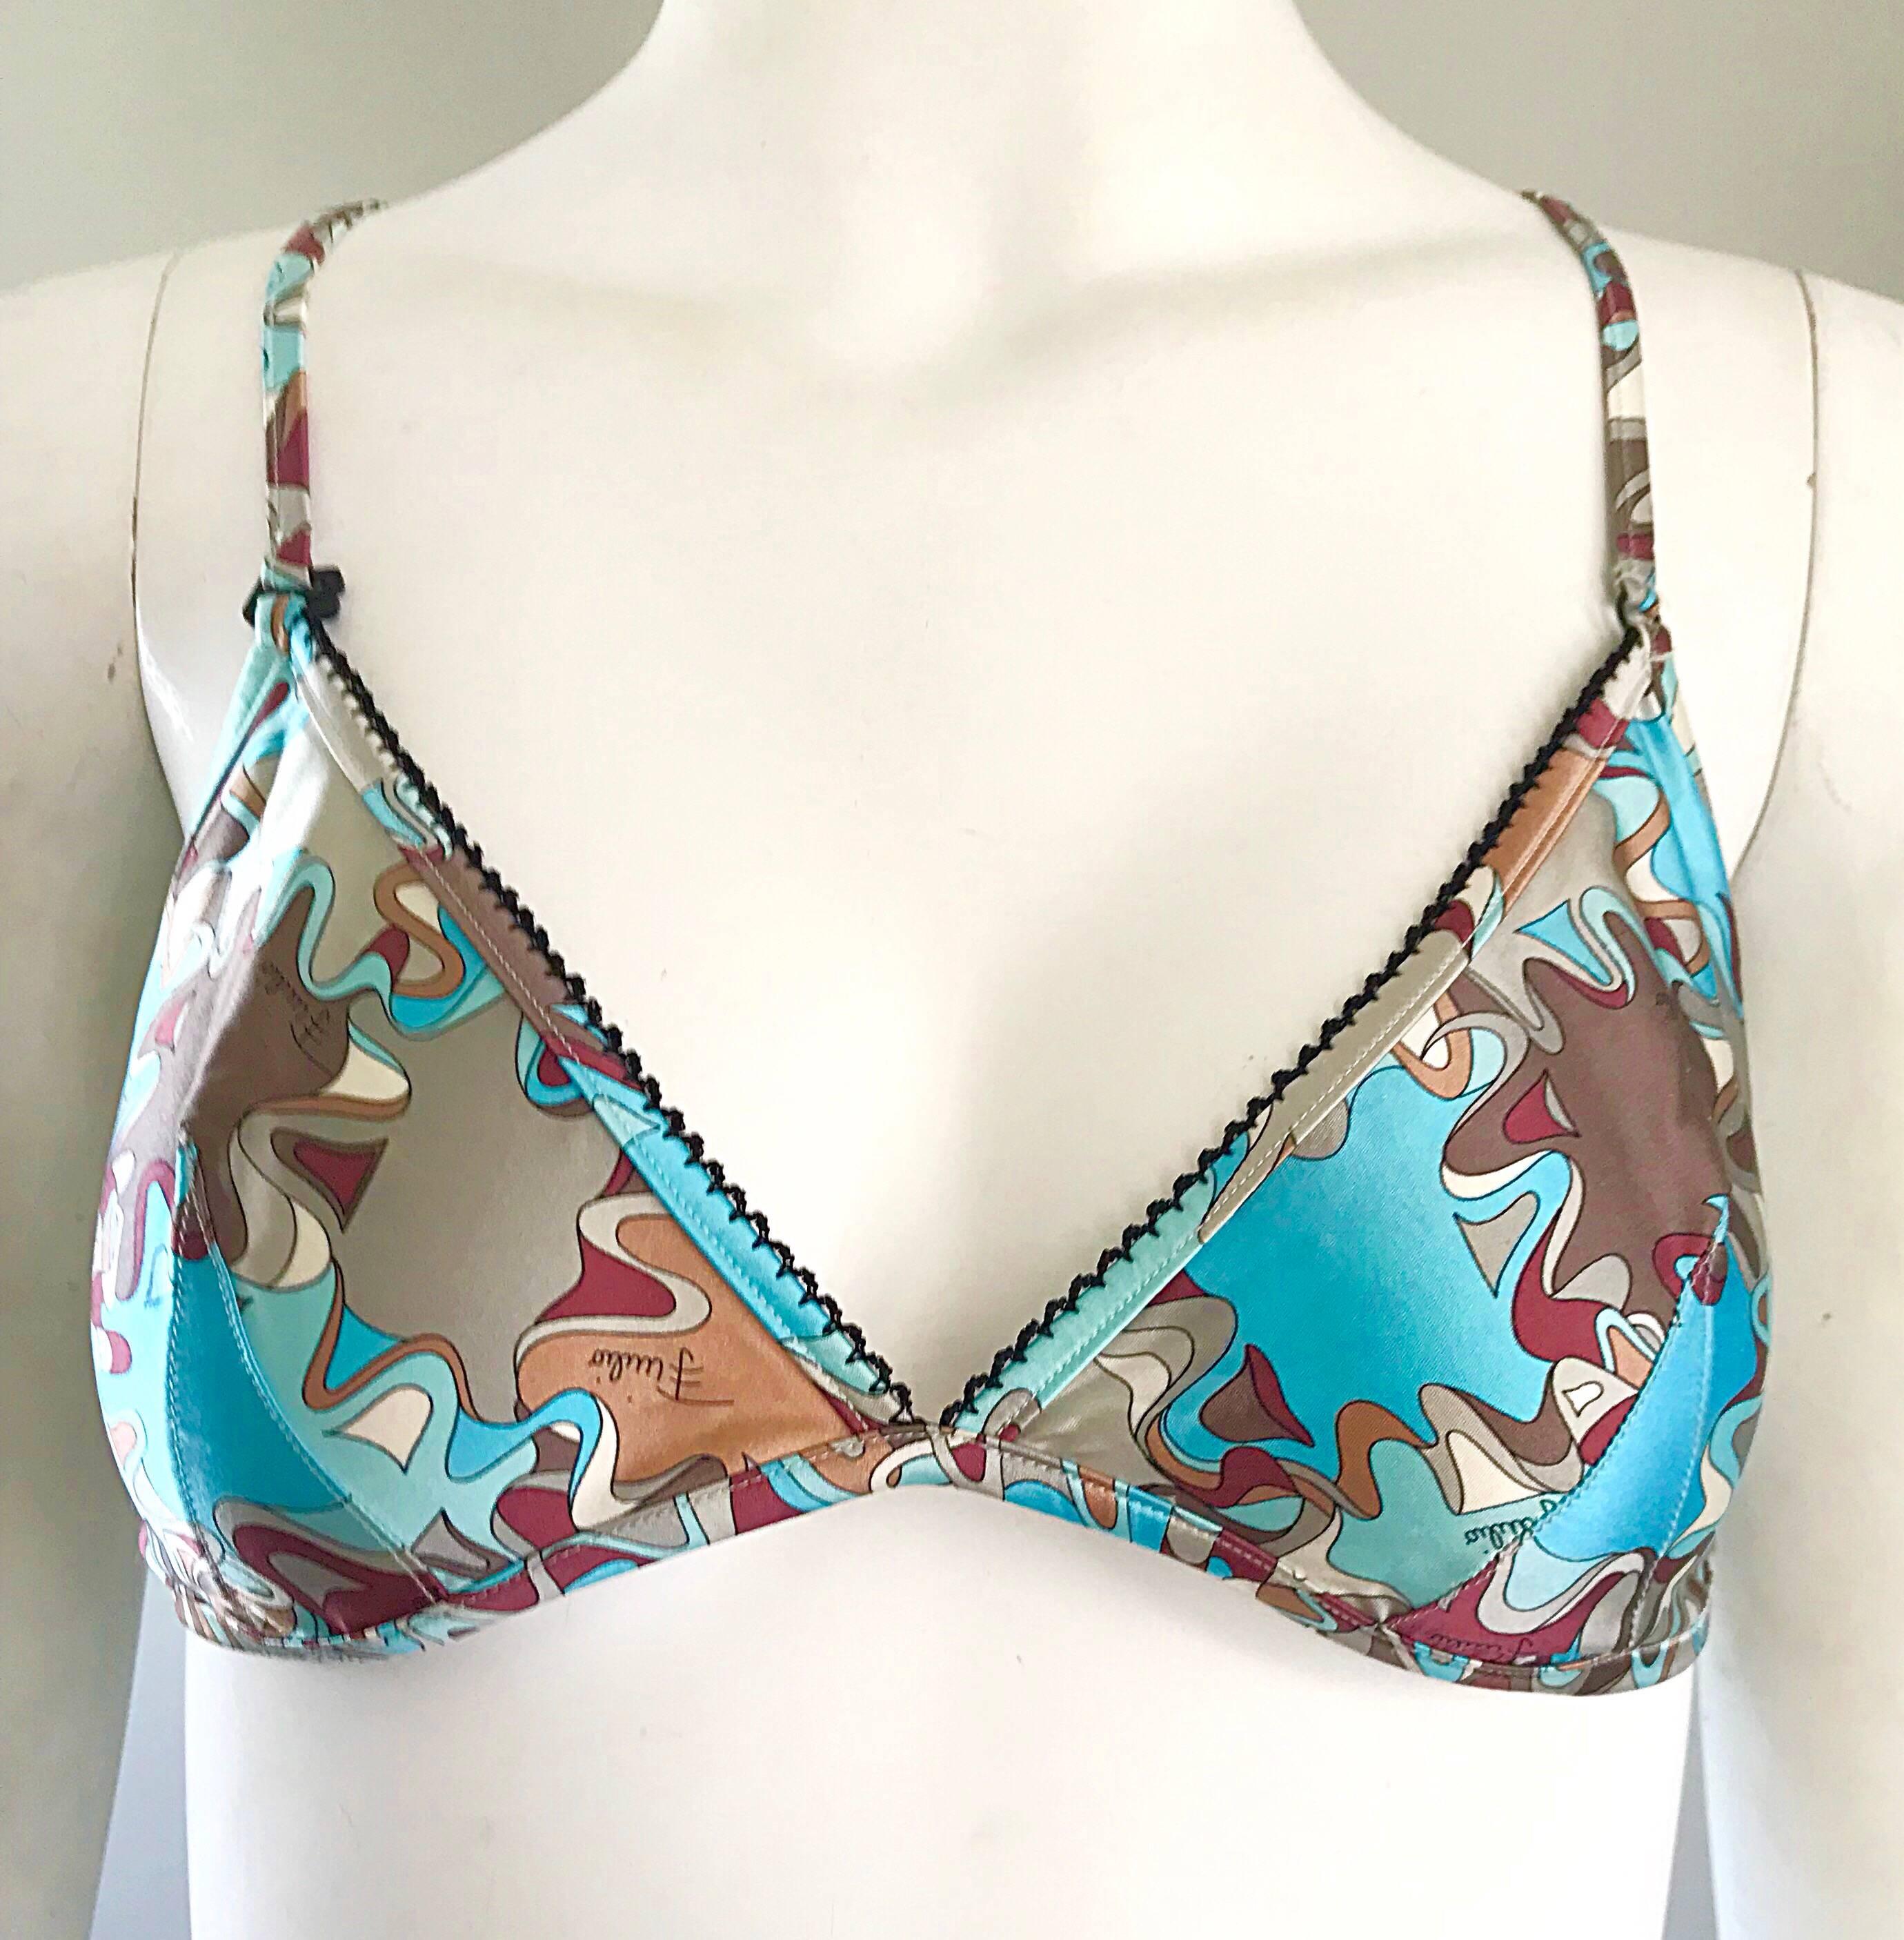 1990s Emilio Pucci New Light Blue + Brown + Maroon Signature Mosaic Silk Bra Top For Sale 1